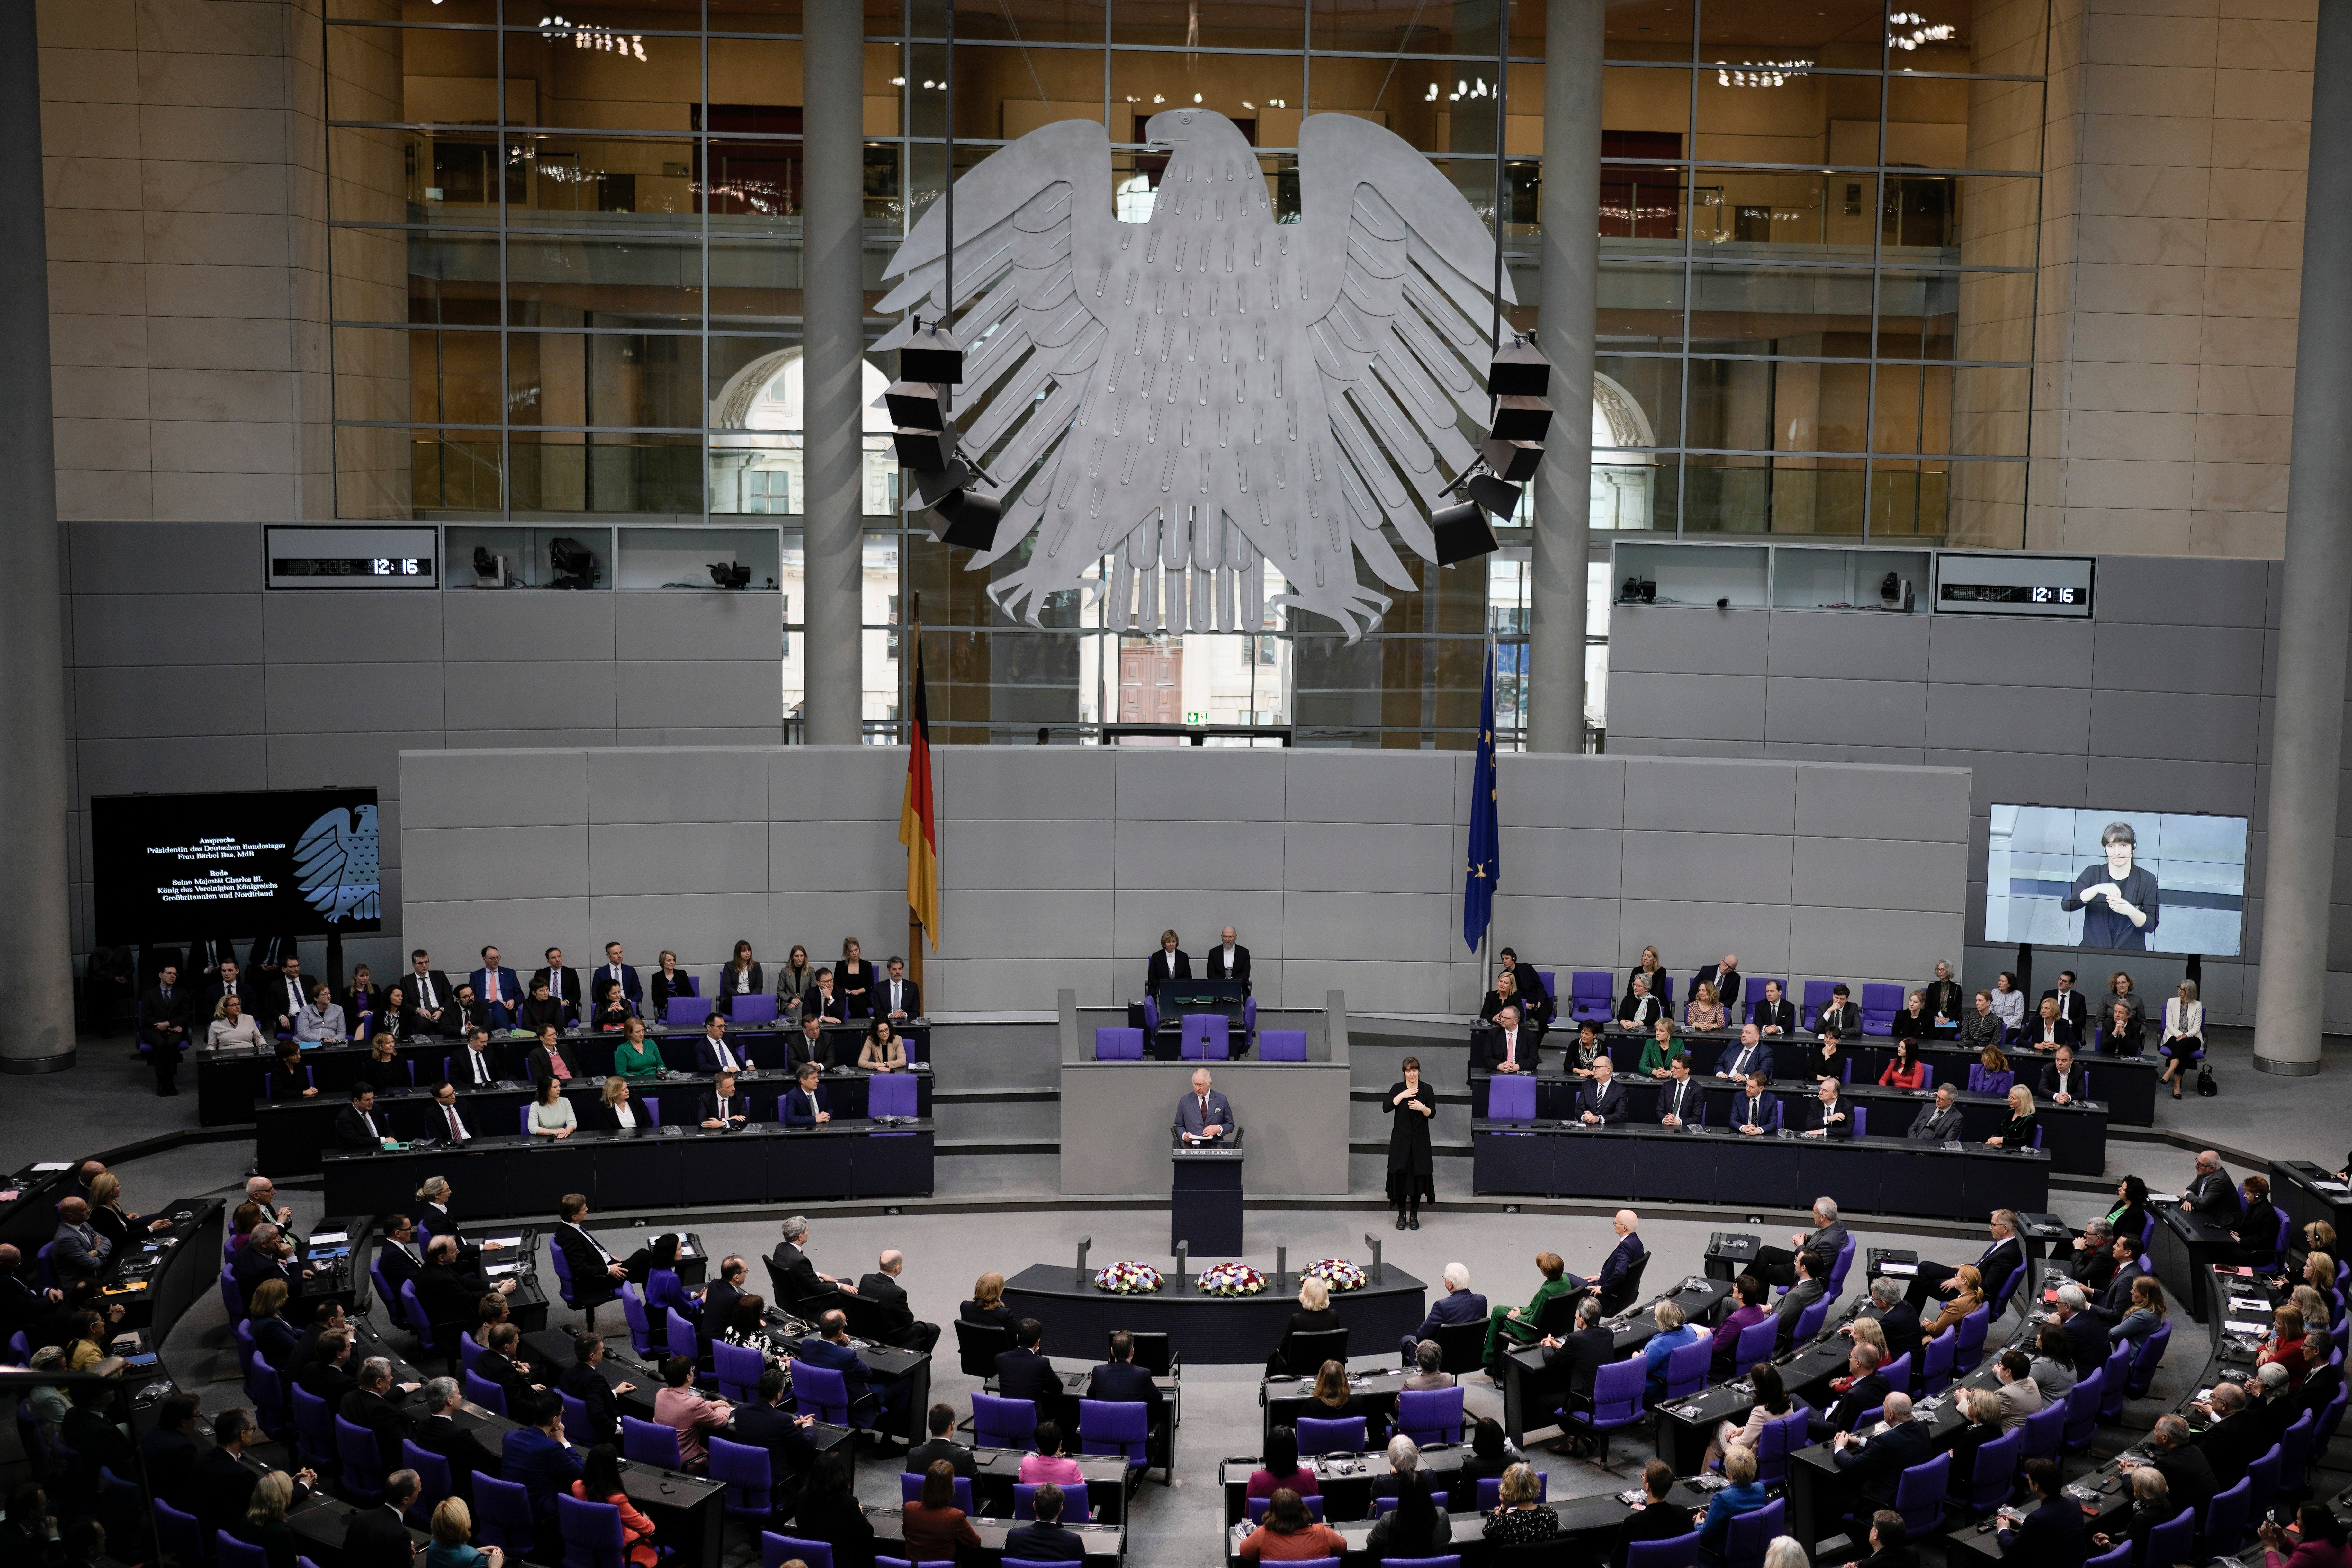 On the second day, the King was invited to deliver an address to the Bundestag – an honour never accorded to the Queen